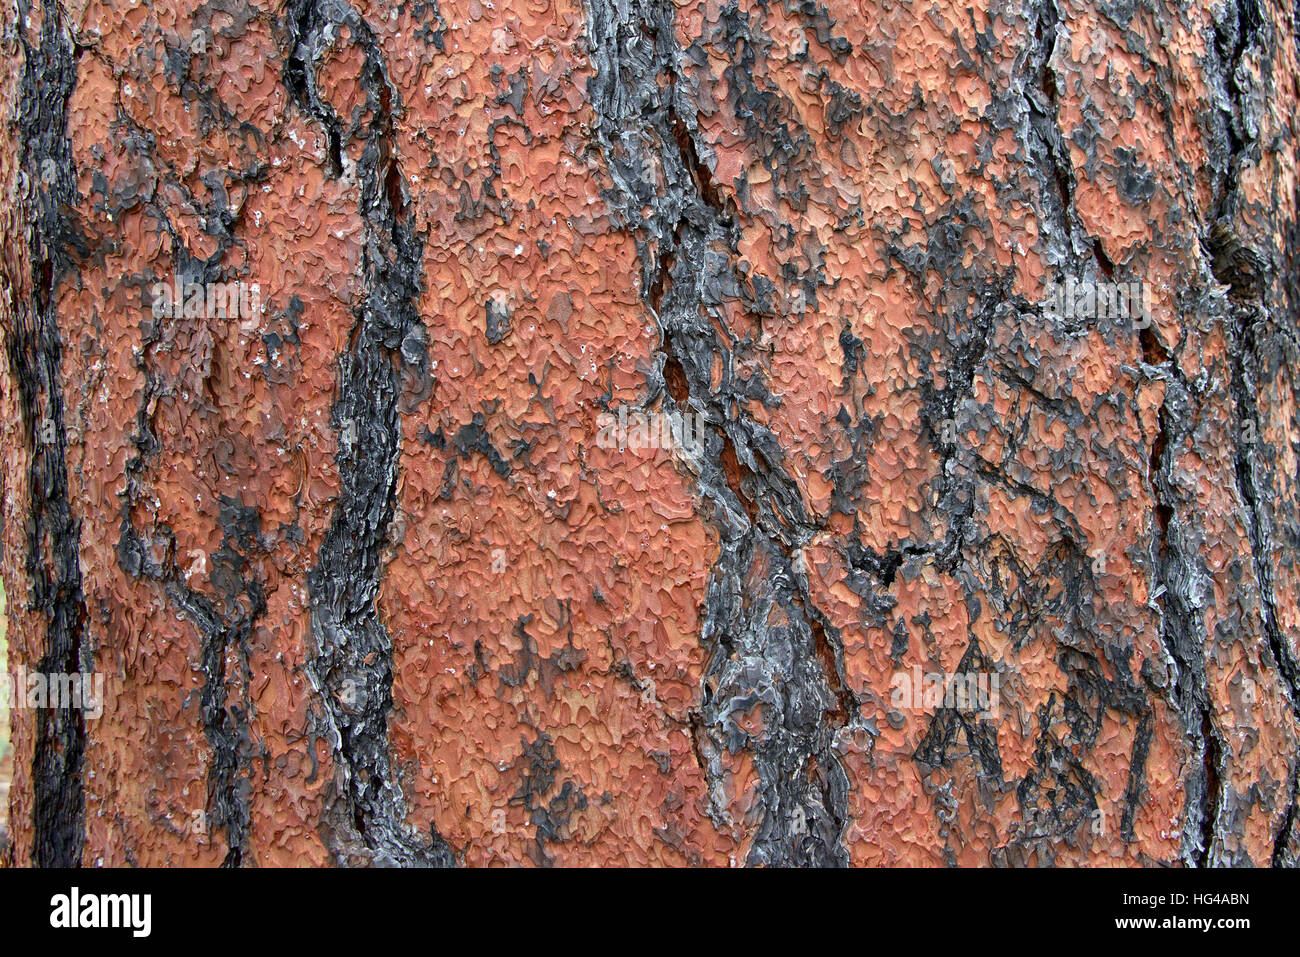 Close up of texture on trunk of a Ponderosa Pine tree in Flagstaff Arizona. Bark peeling in a unique puzzle formation Stock Photo